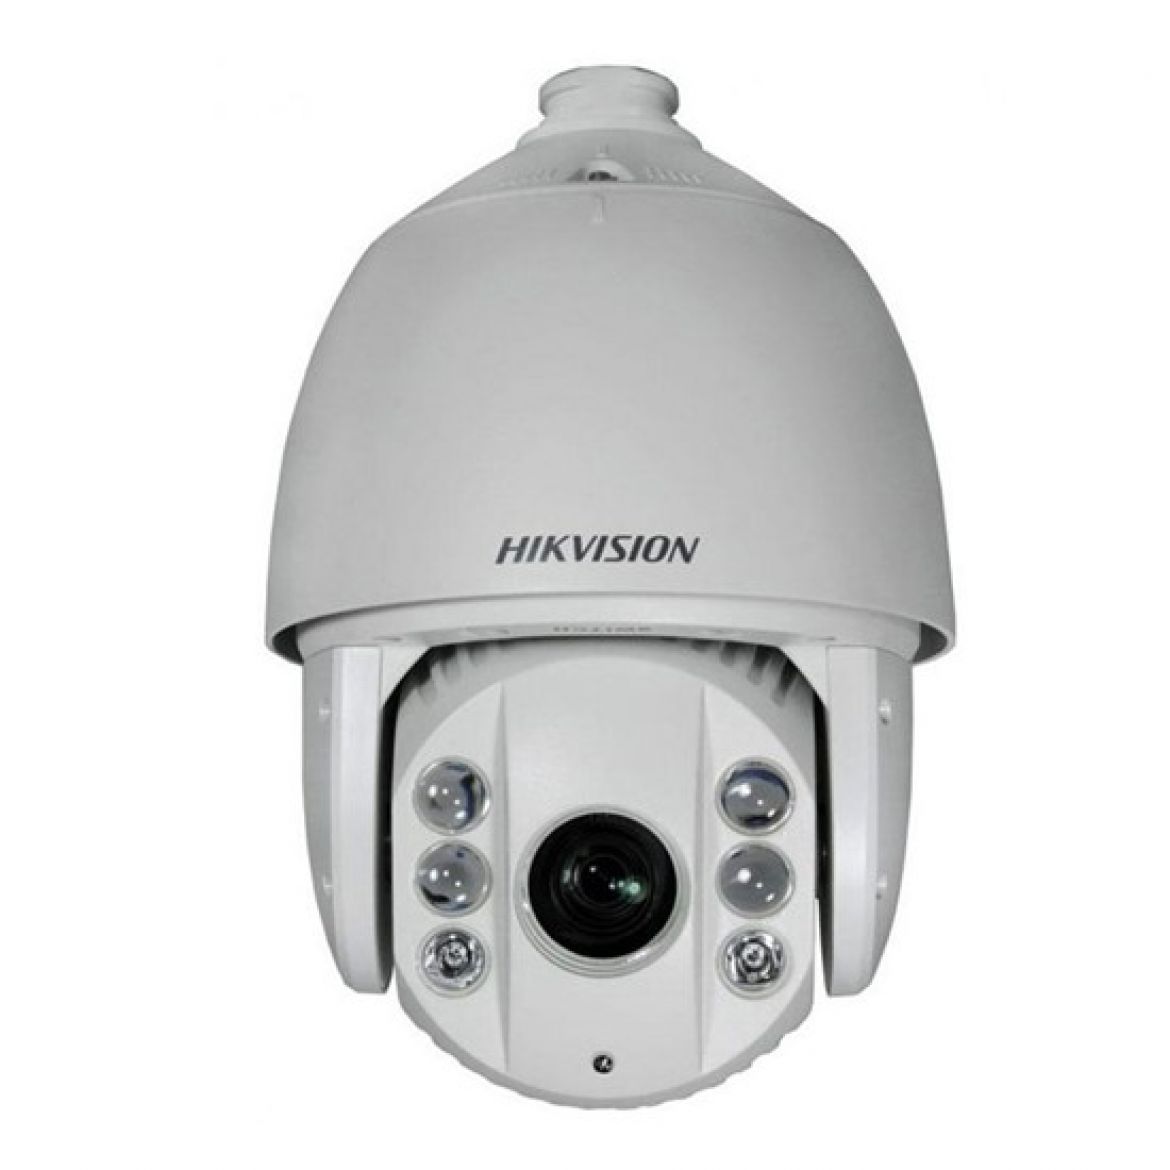 Hikvision DS-2AE7230TI-A 2MP 